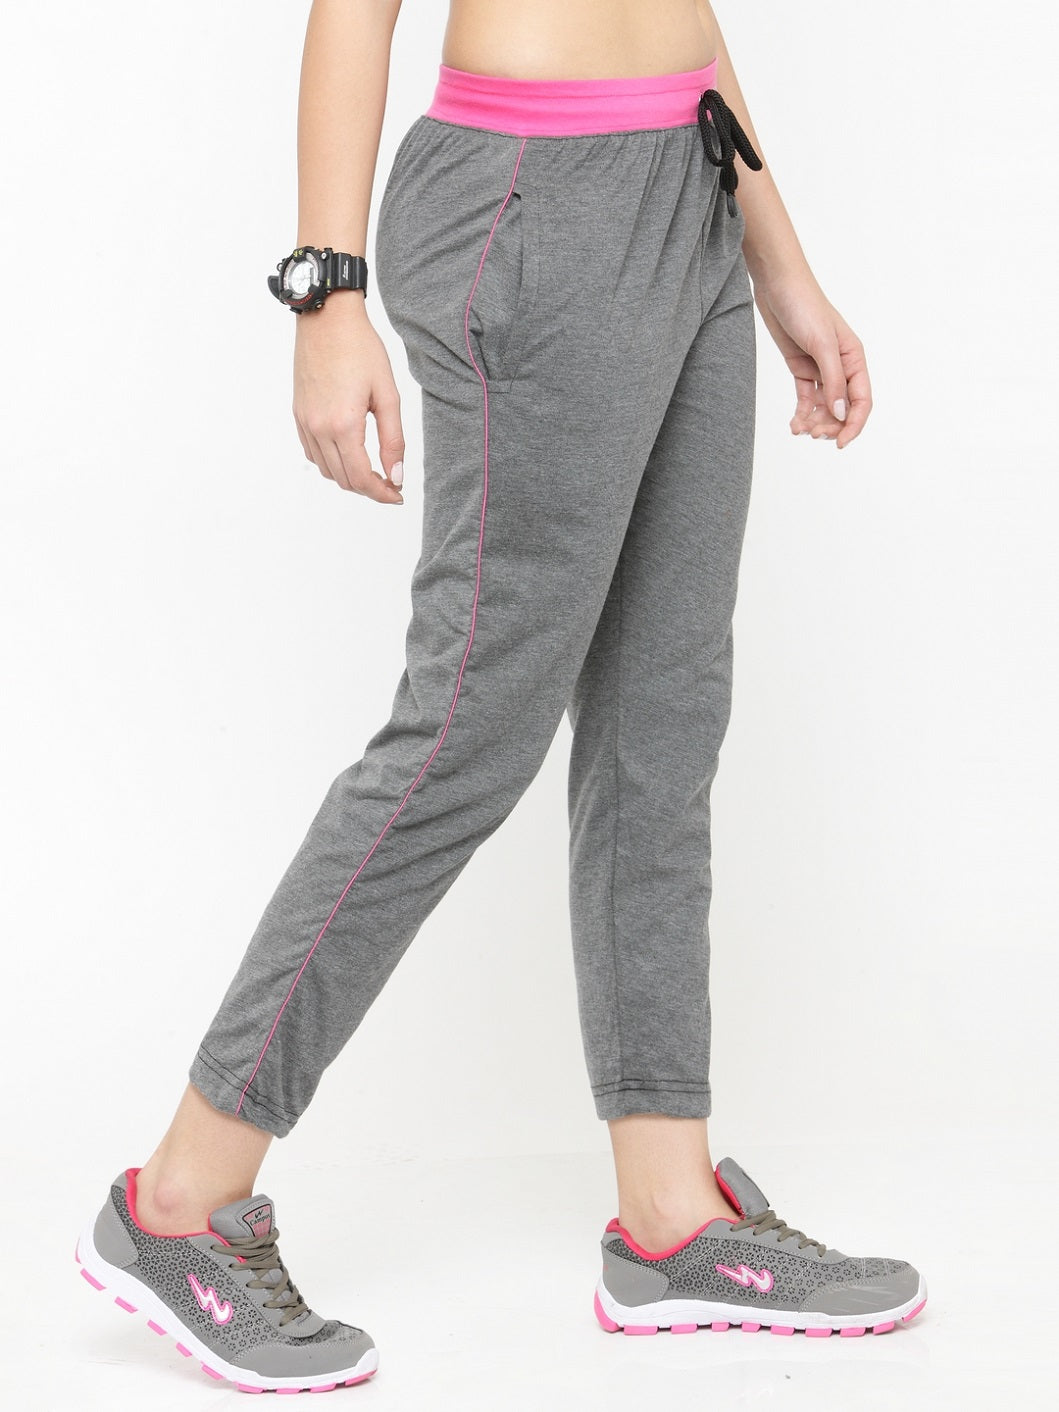 Stylish Track Pants for a Fashionable Look